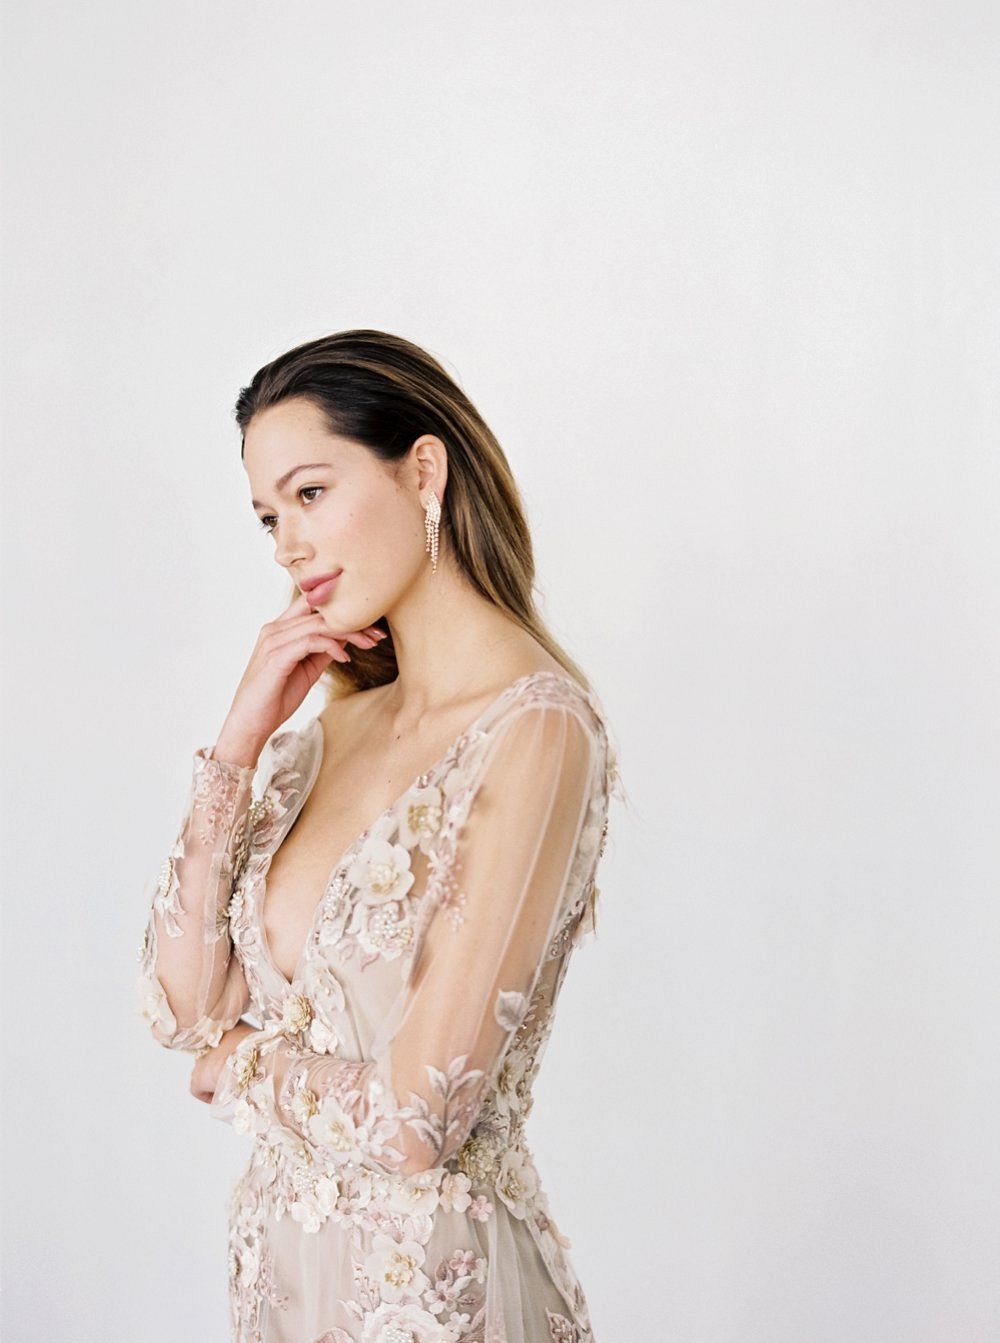 Handmade Wedding Gowns with Floral Appliqué by Gossamer